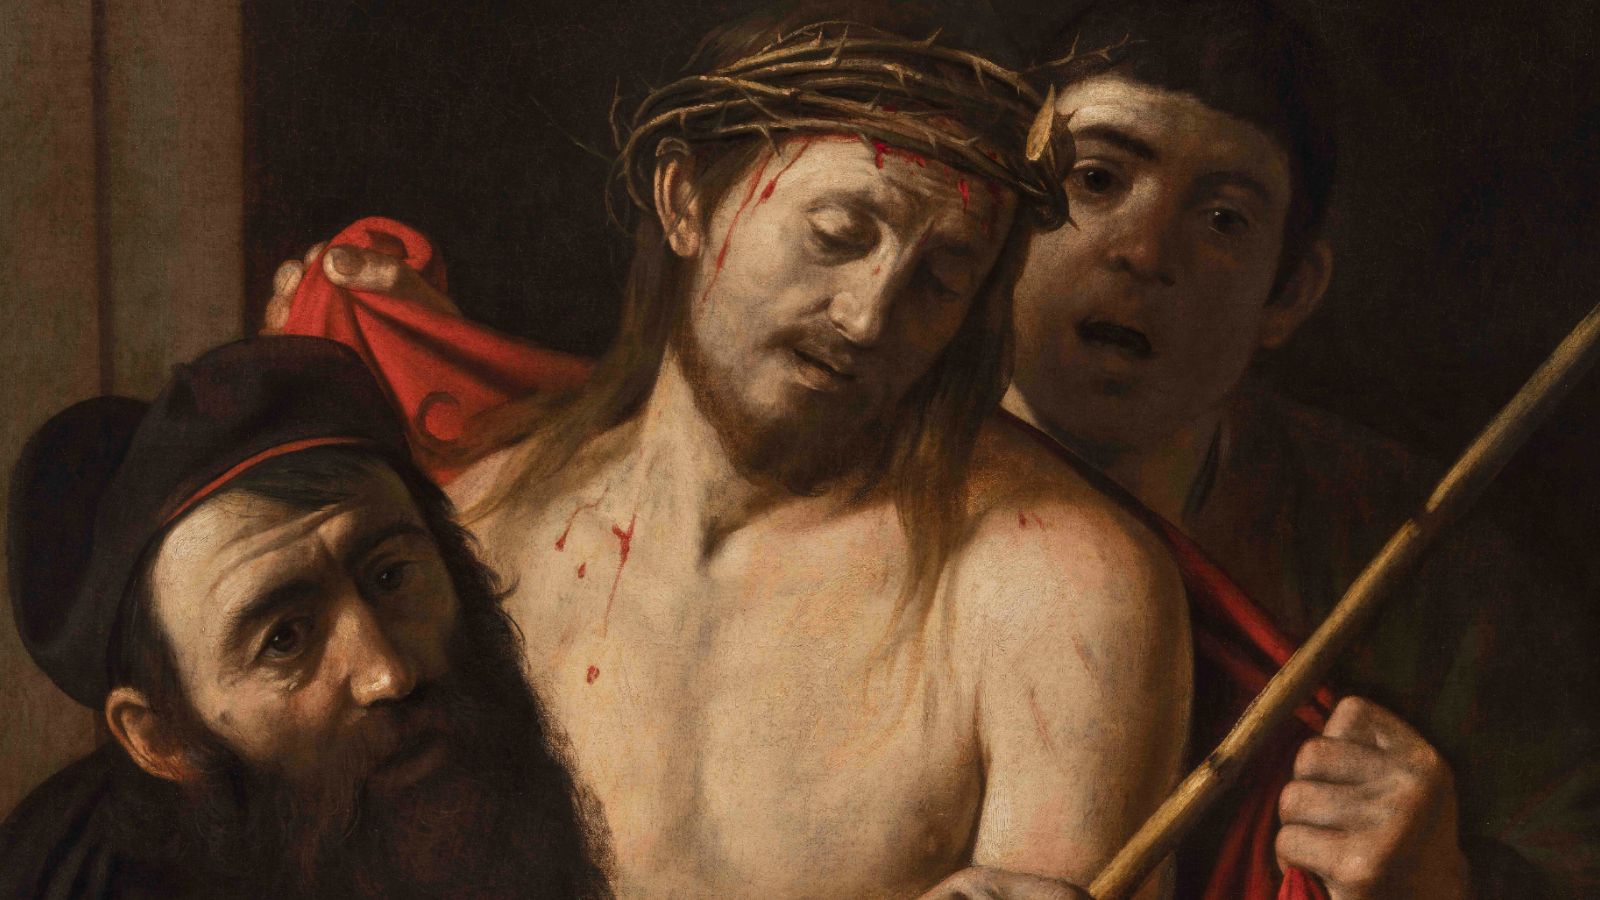 Ecce Homo: Painting once up for auction for €1,500 confirmed as rare Caravaggio work